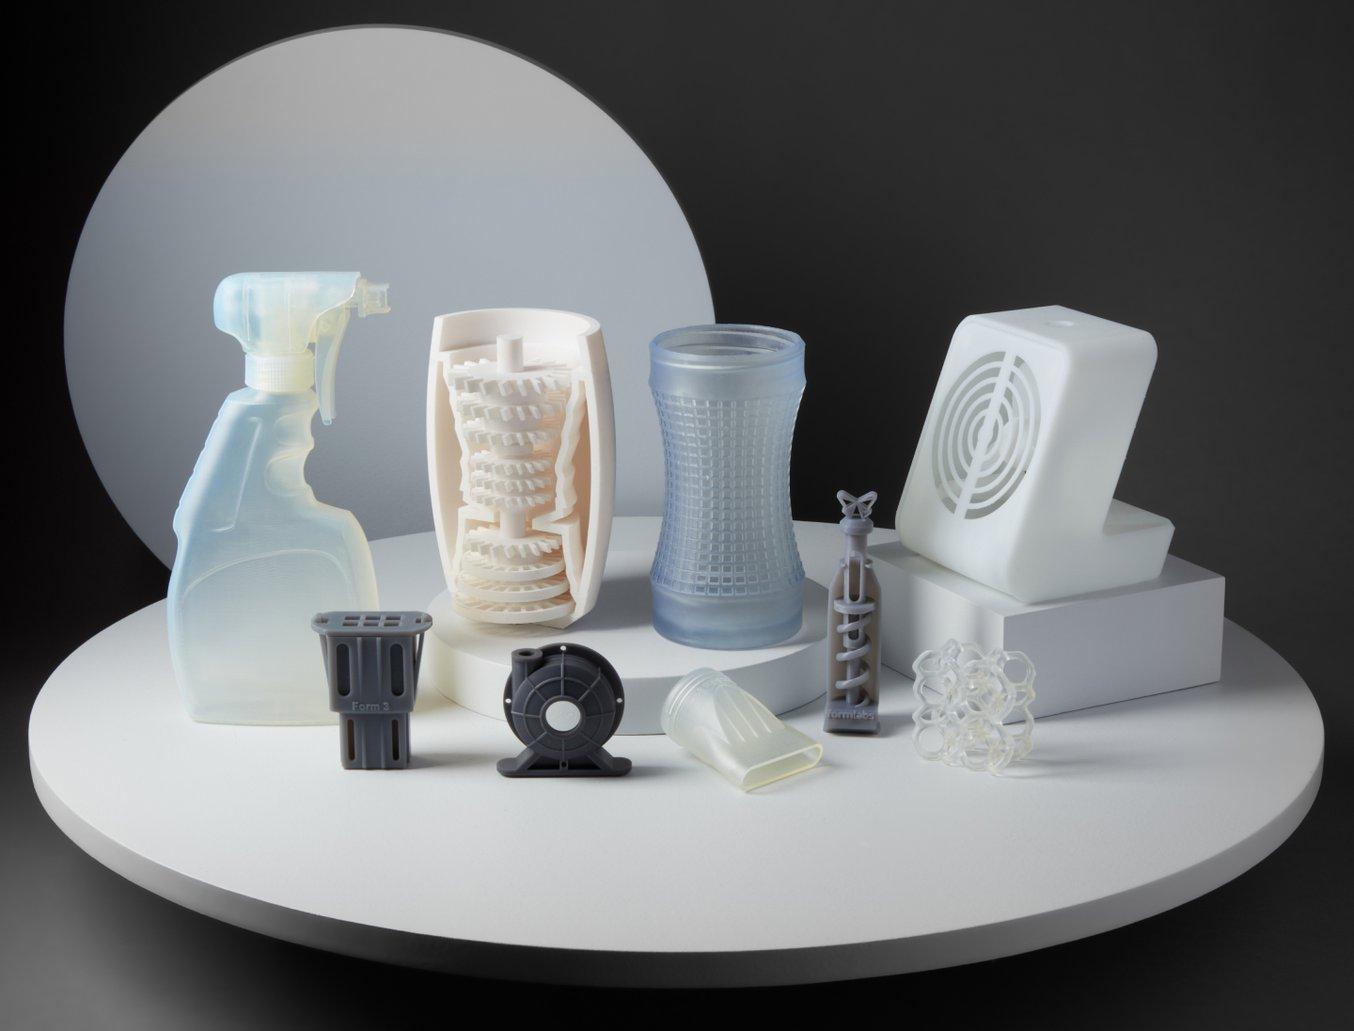 Formlabs 工程树脂